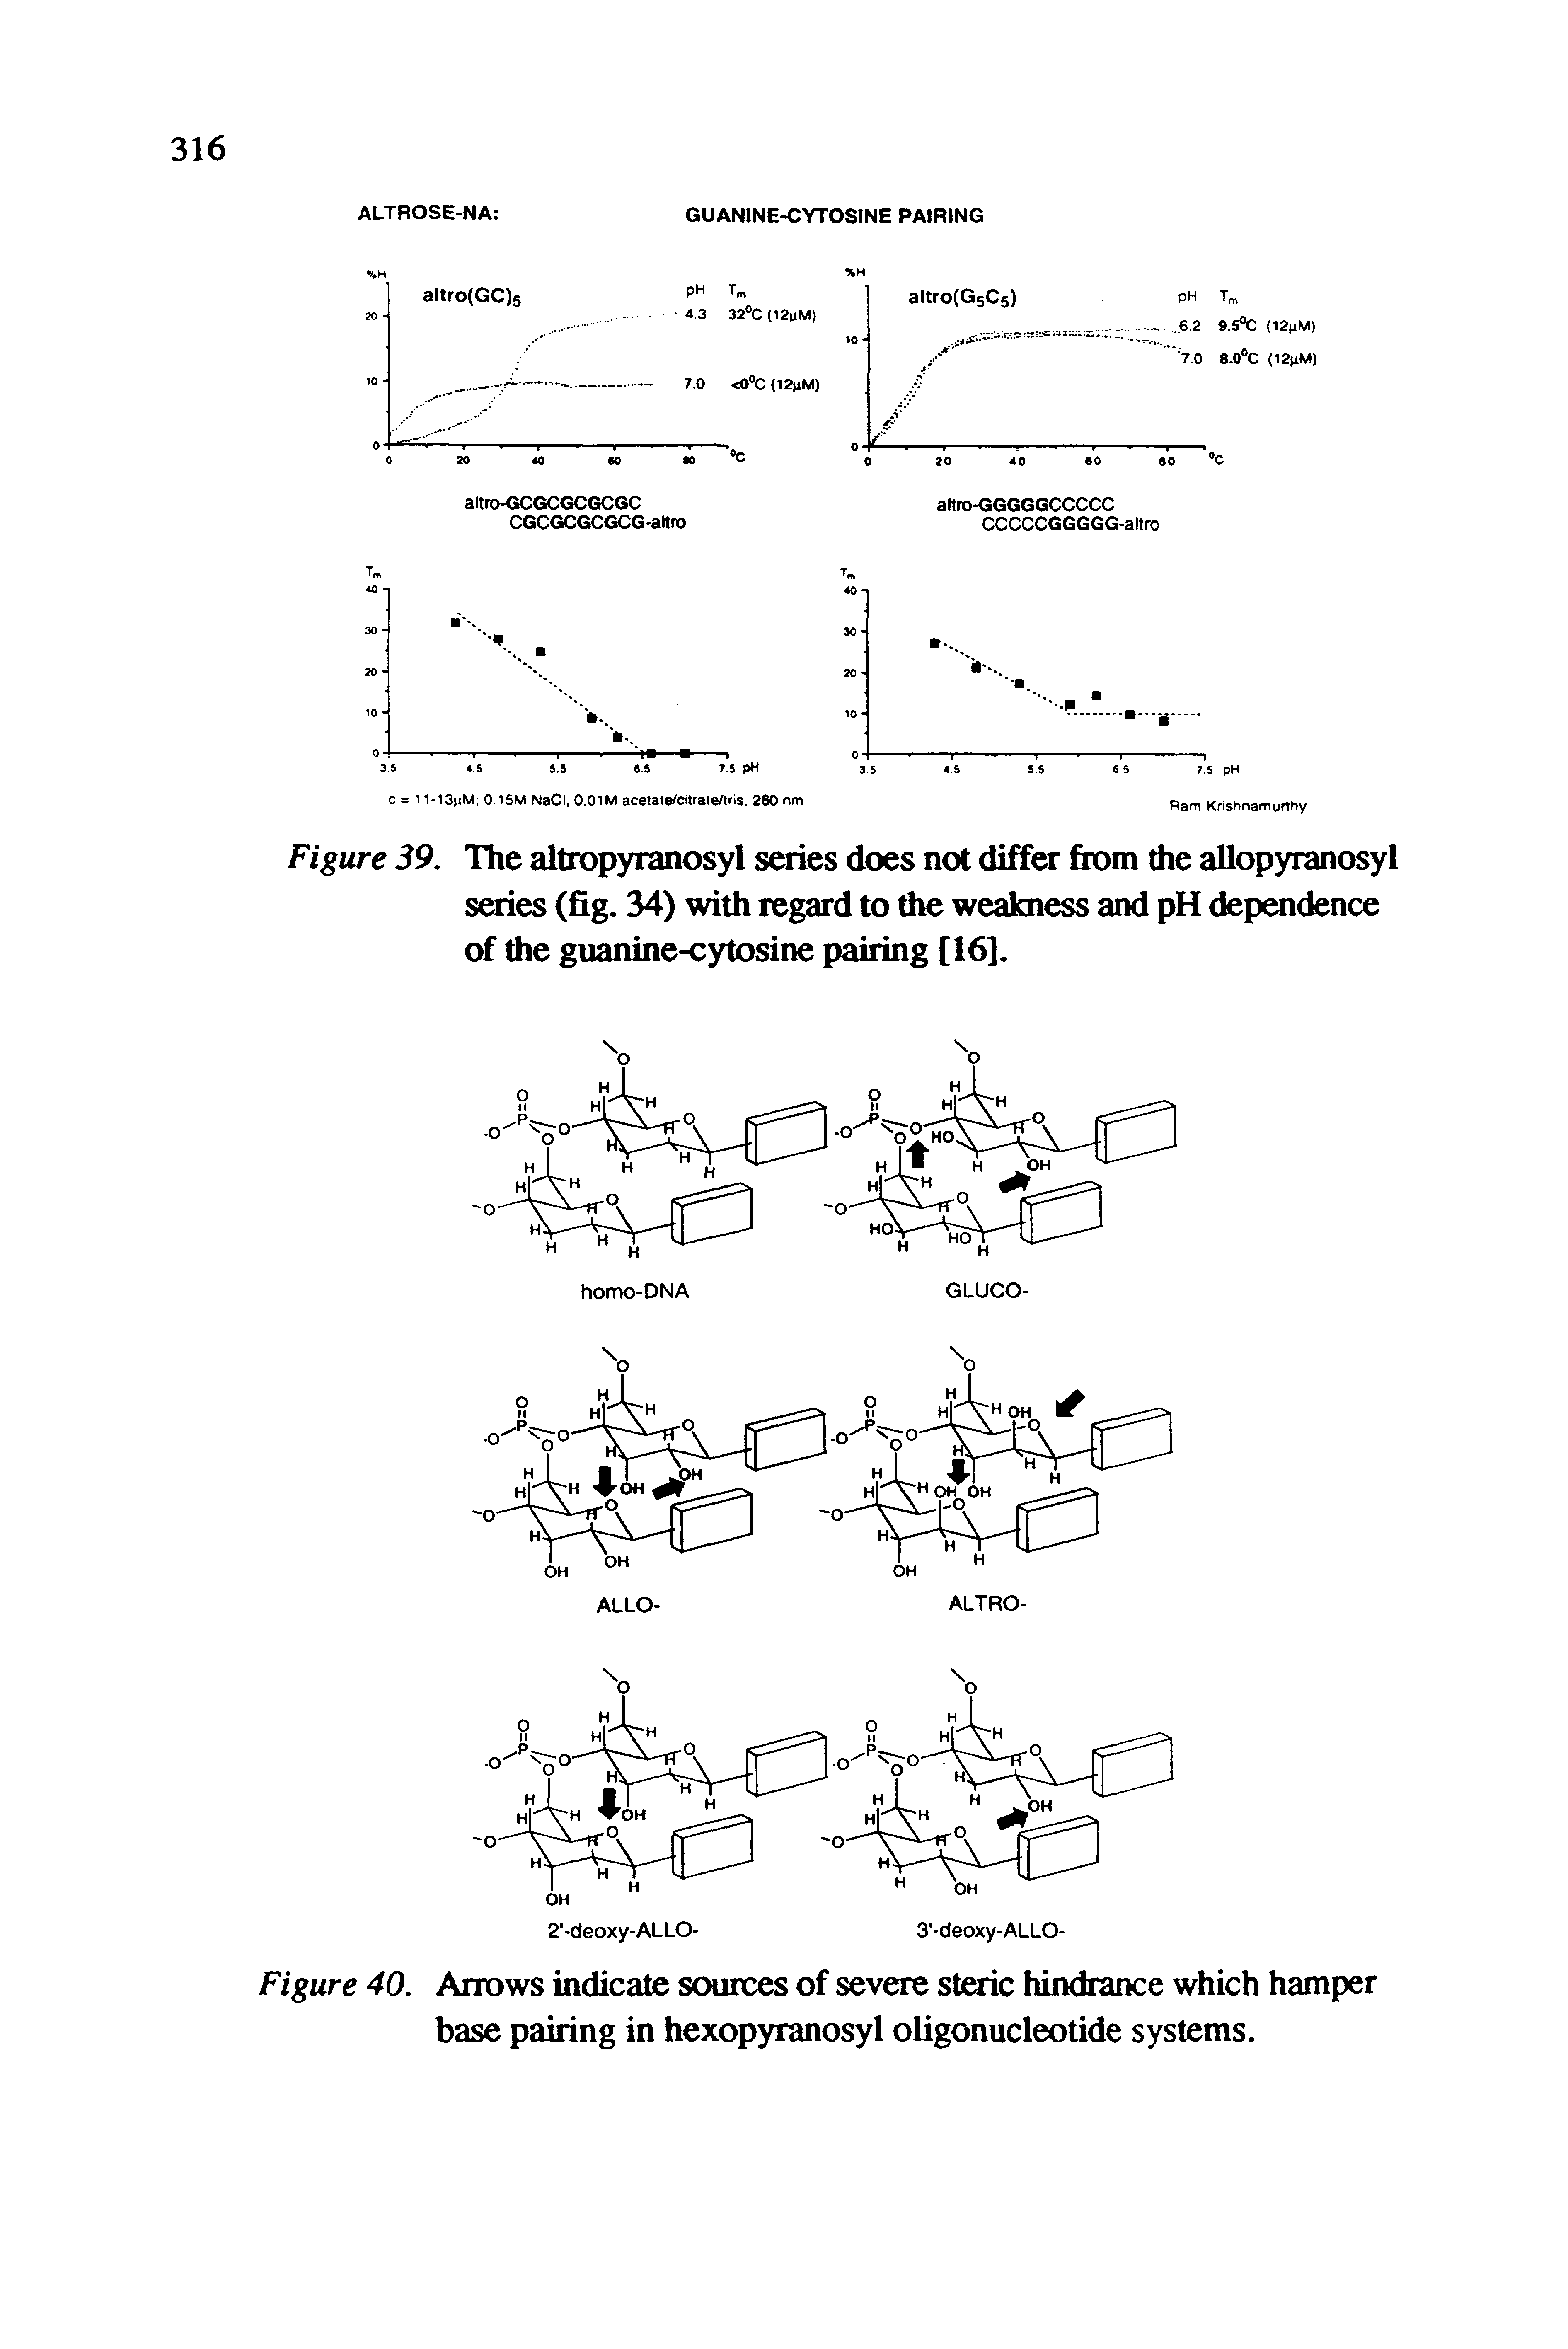 Figure 39. The altropyianosyl series does not differ from the allopyianosyl smes (fig. 34) with regard to the weakness and pH dependence of the guanine-cytosine pairing [16].